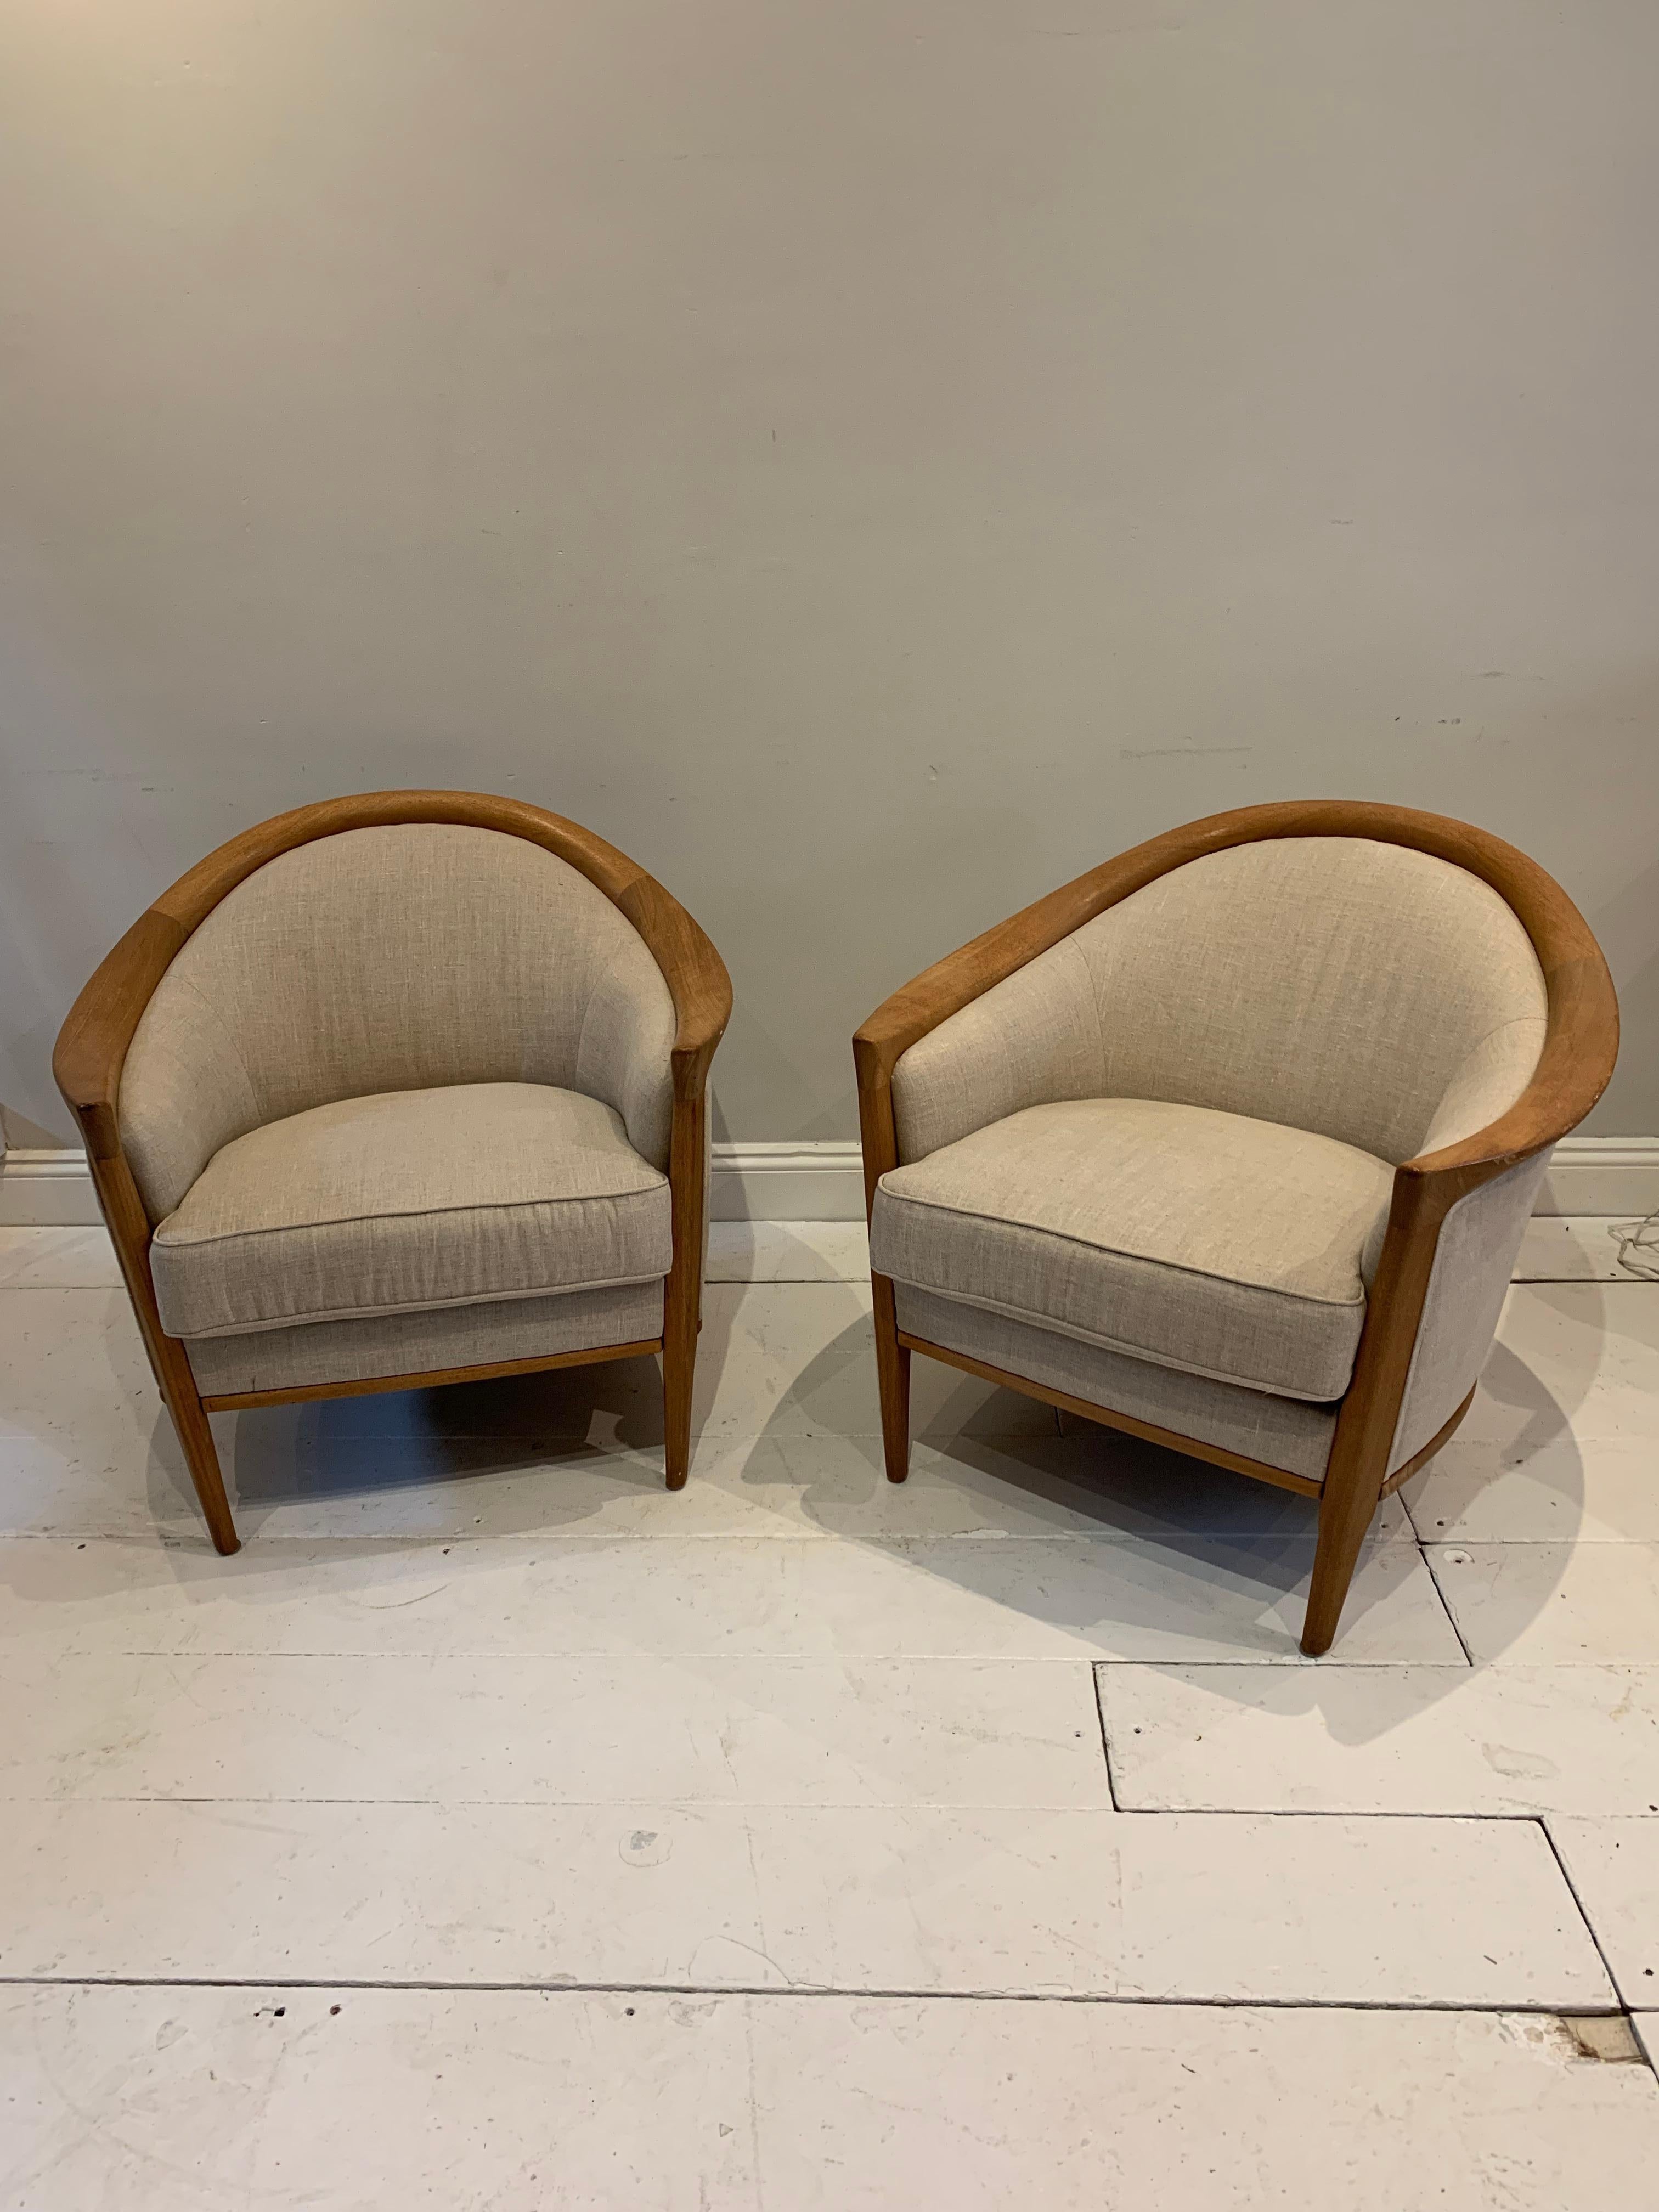 A stylish pair of very comfortable Swedish oak armchairs. There is a very small difference in their size which is barely noticeable .
The backs are deep and curved with thick cushions. The wood is a dark honey colour. The armchairs have recently